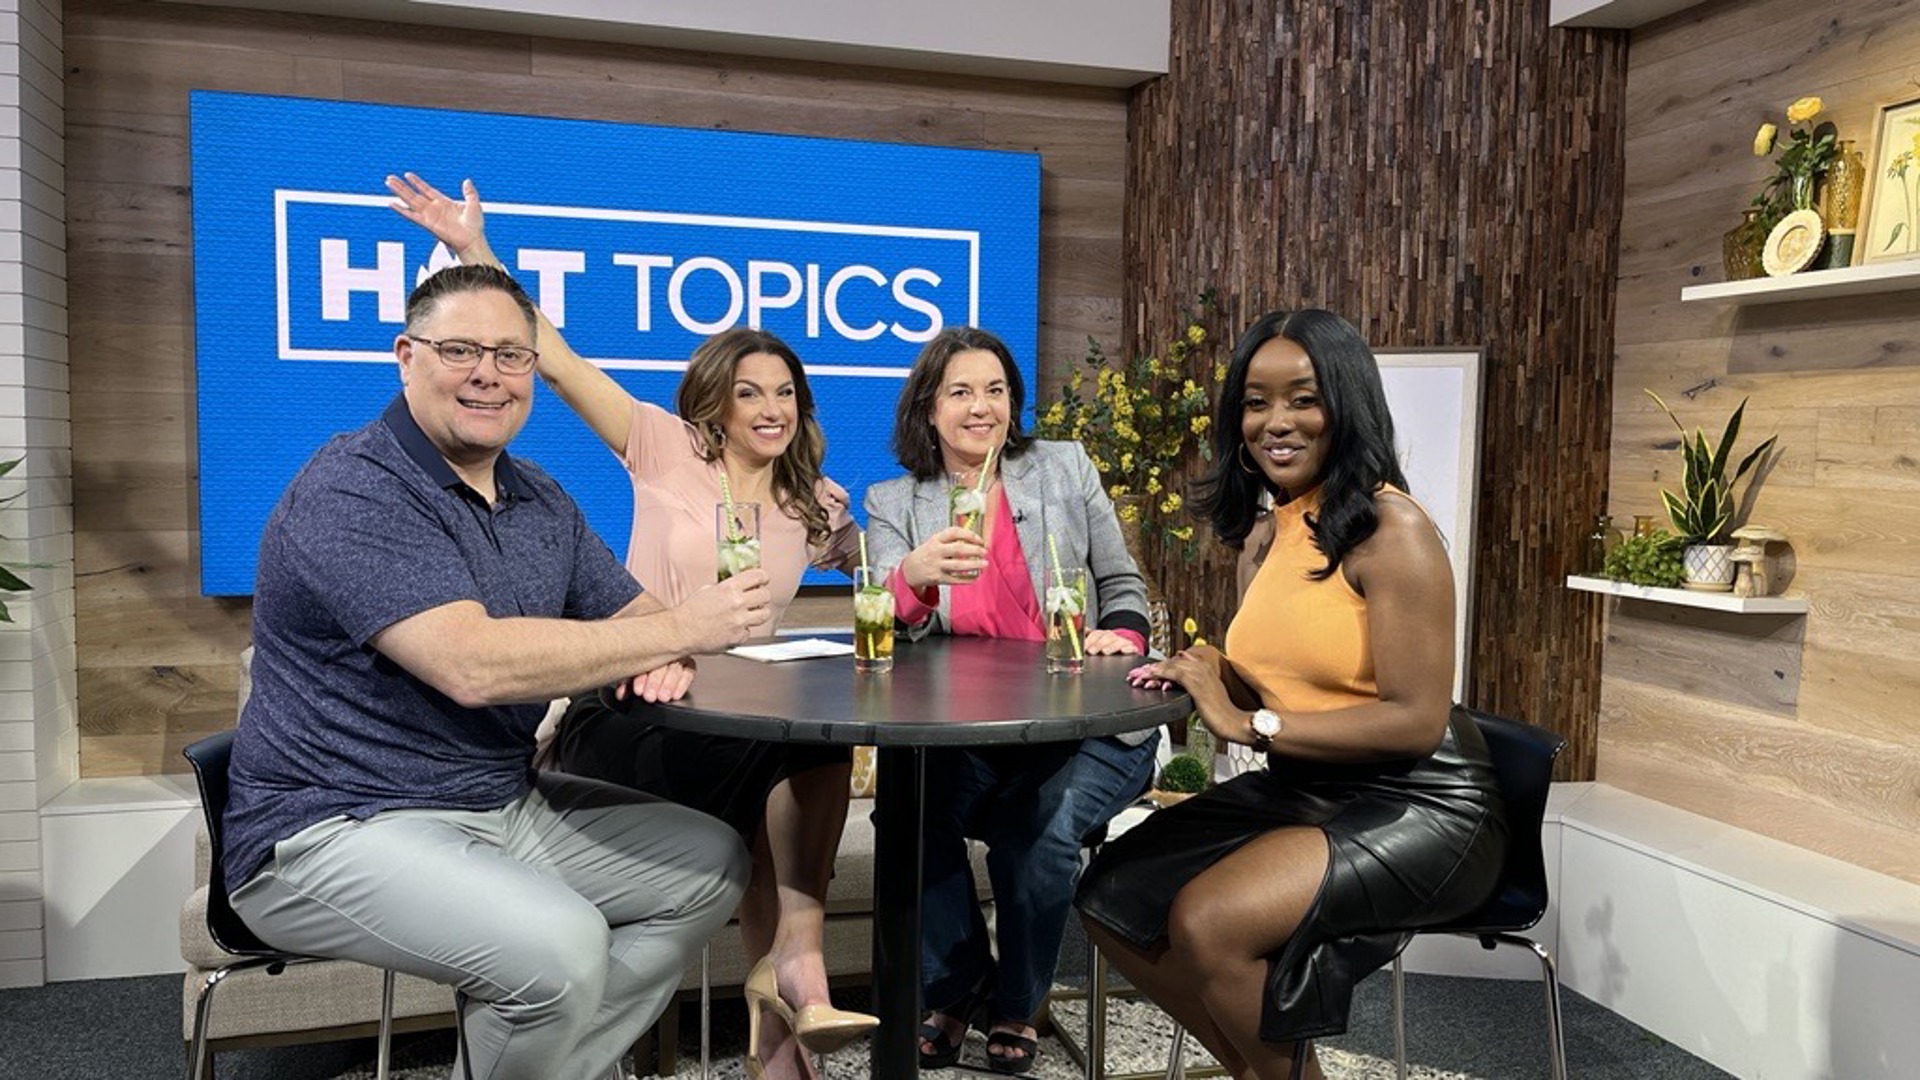 Amity talks escaped zebras, naked gardening and zipper merging with Shante Sumpter, Chris Sullivan from KIRO Radio and Producer Suzie Wiley. #newdaynw